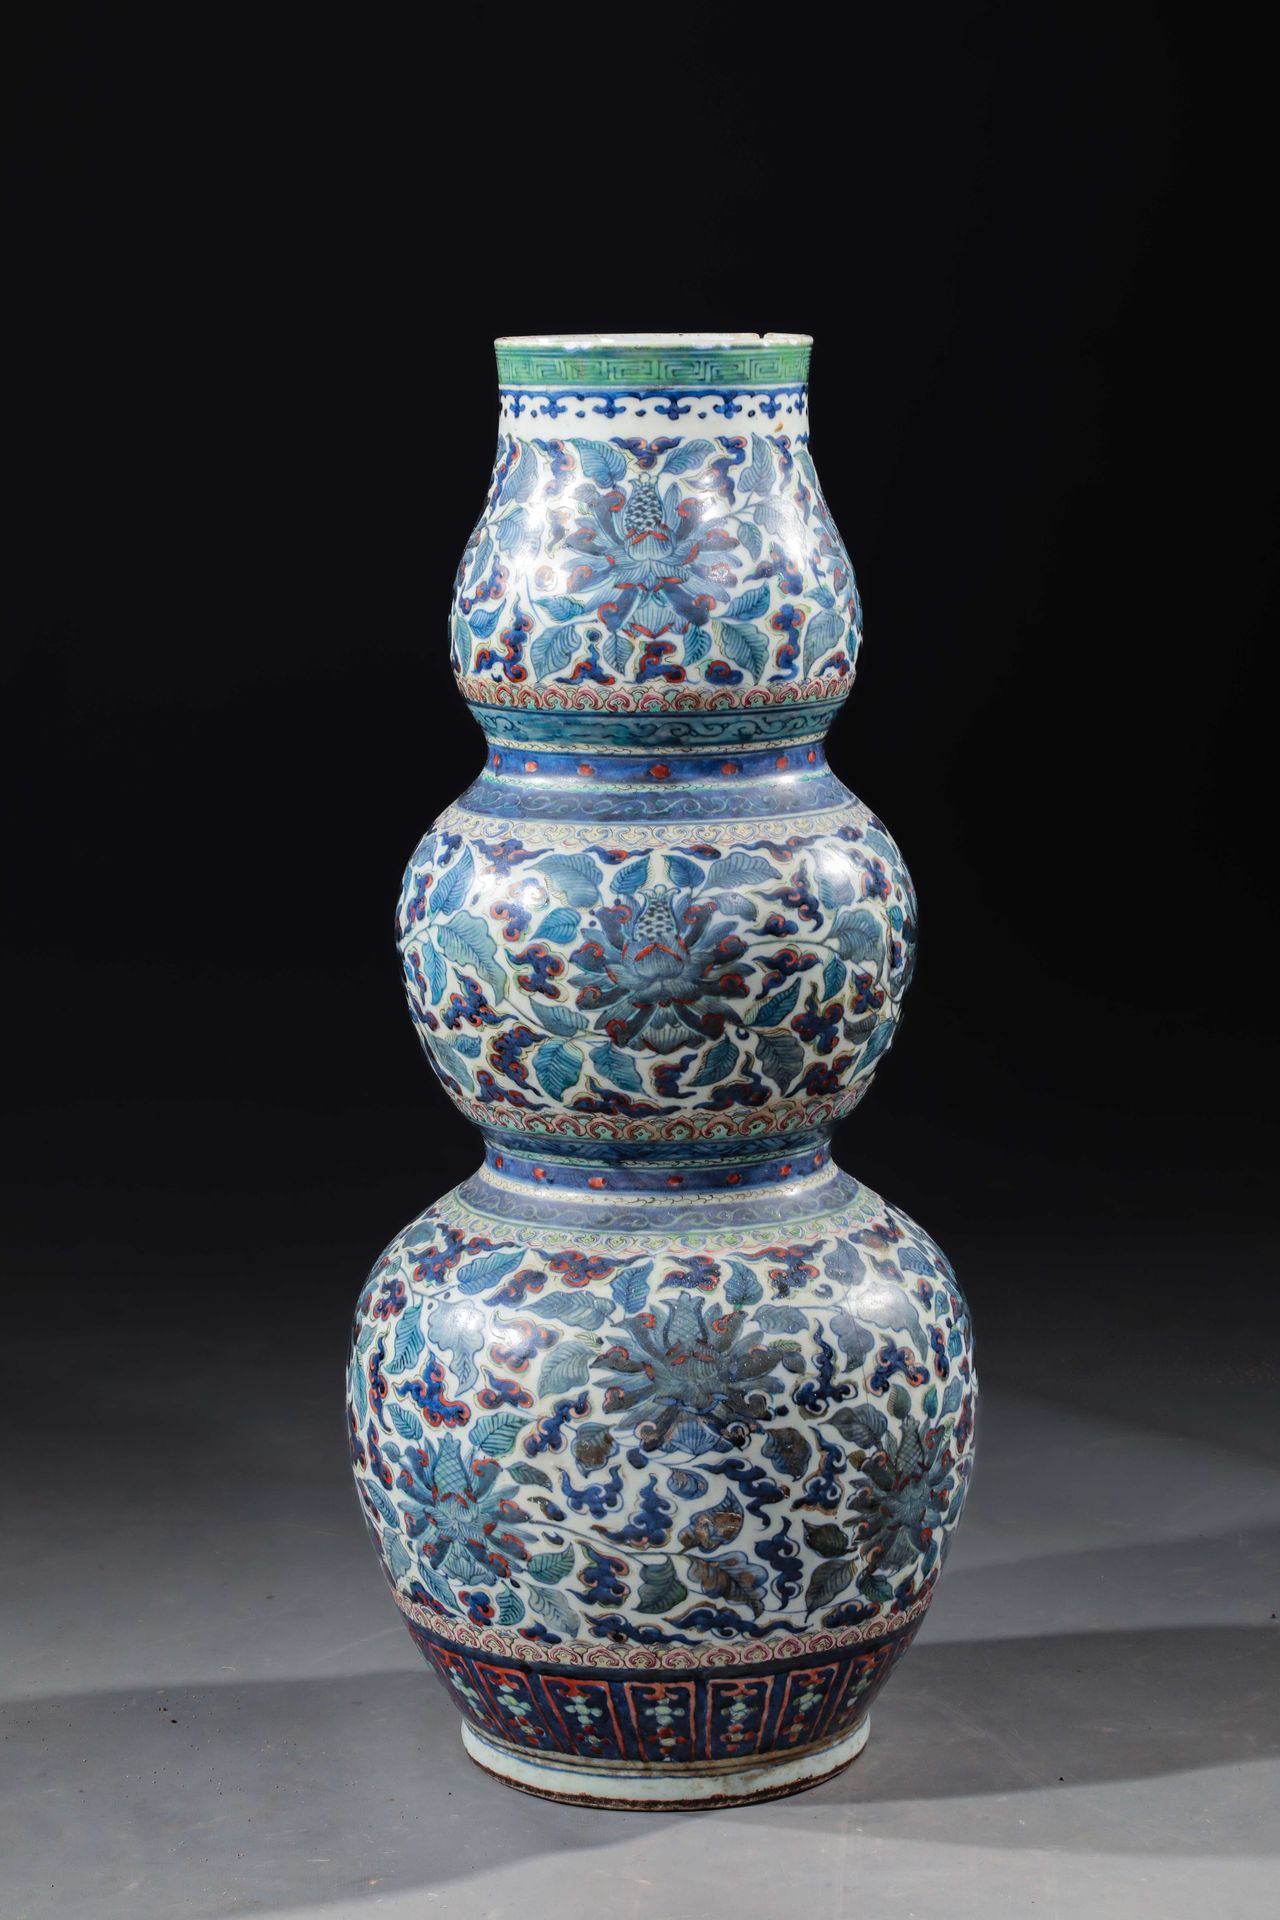 Null Porcelain vase with polychrome floral decoration, in the form
of a double c&hellip;